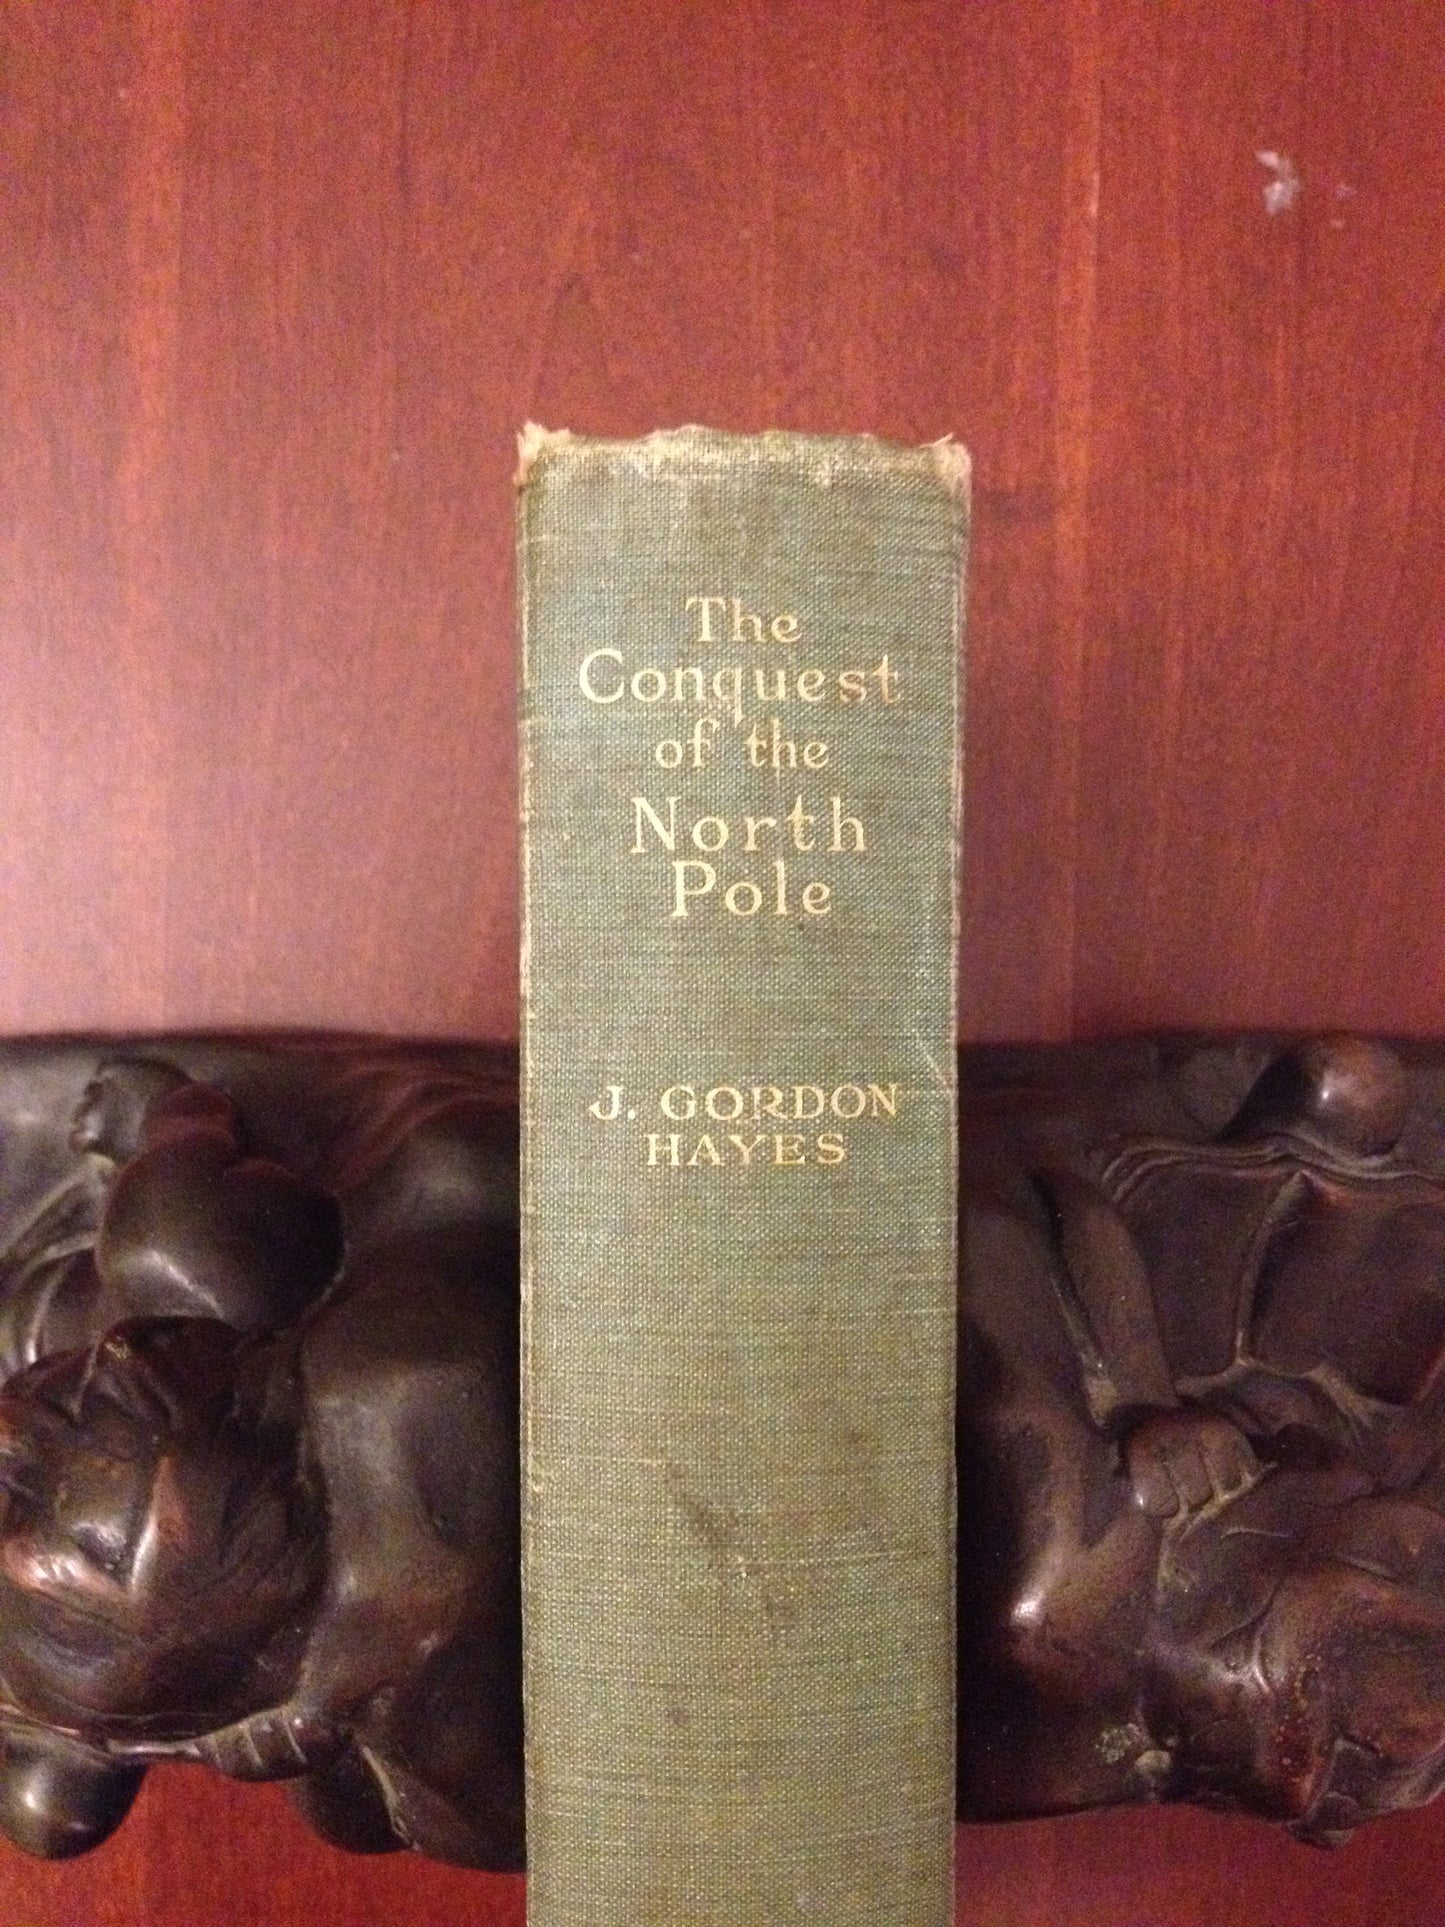 THE CONQUEST OF THE NORTH POLE  BY: J.GORDON HAYES